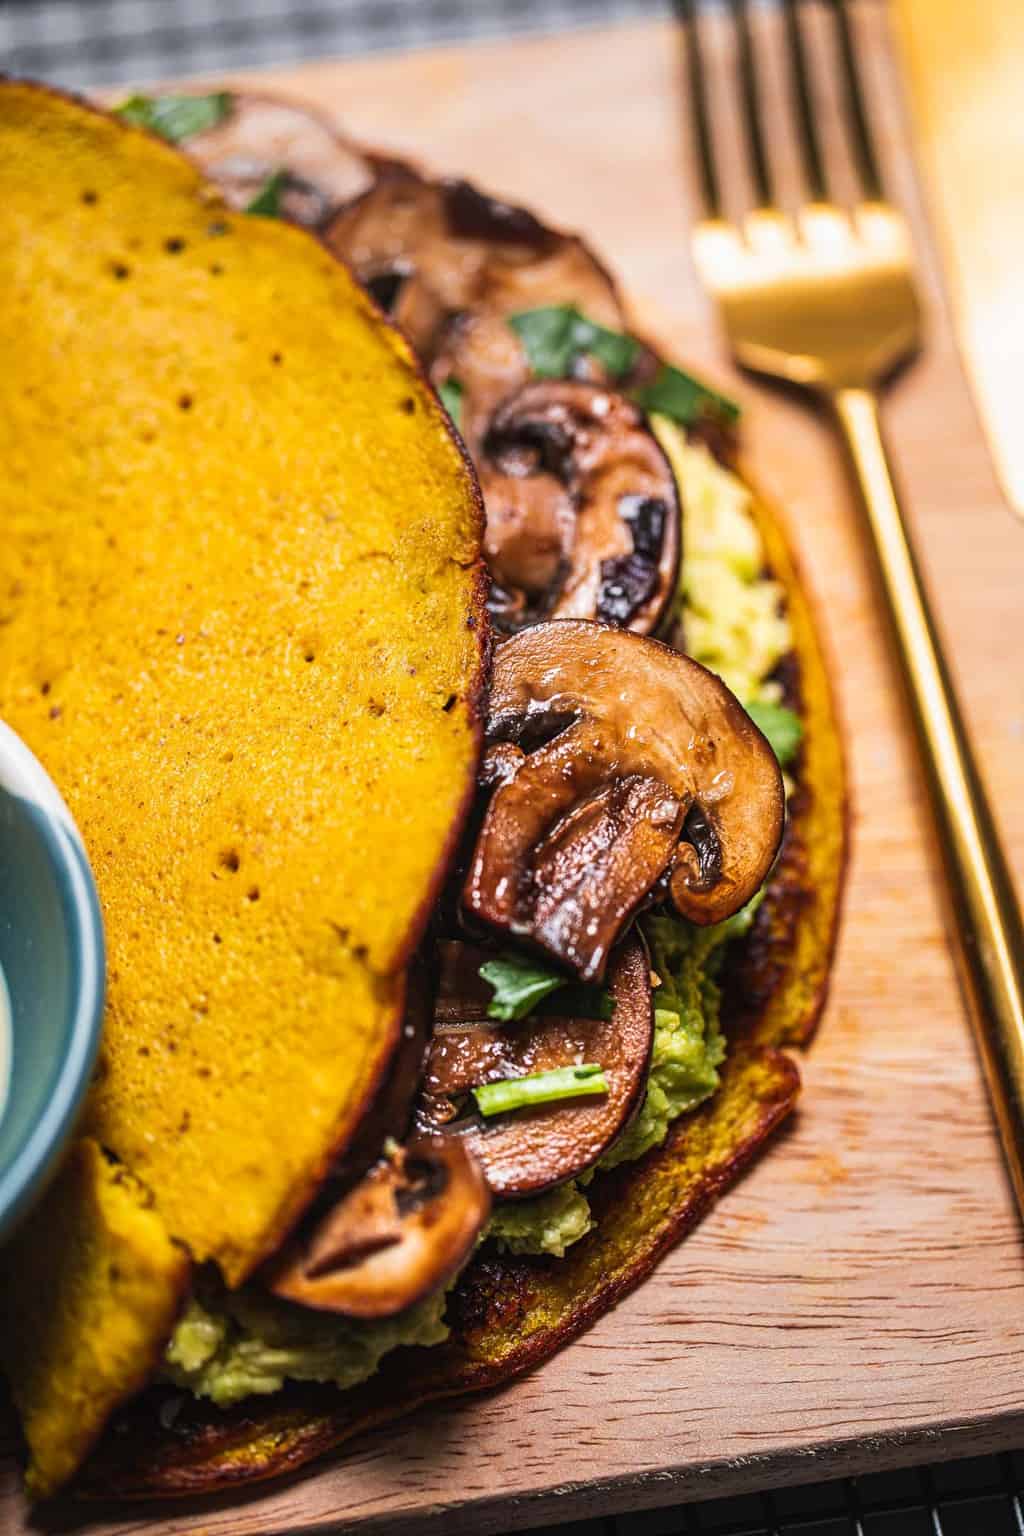 How To Make A Chickpea Omelette With Tamari Mushrooms